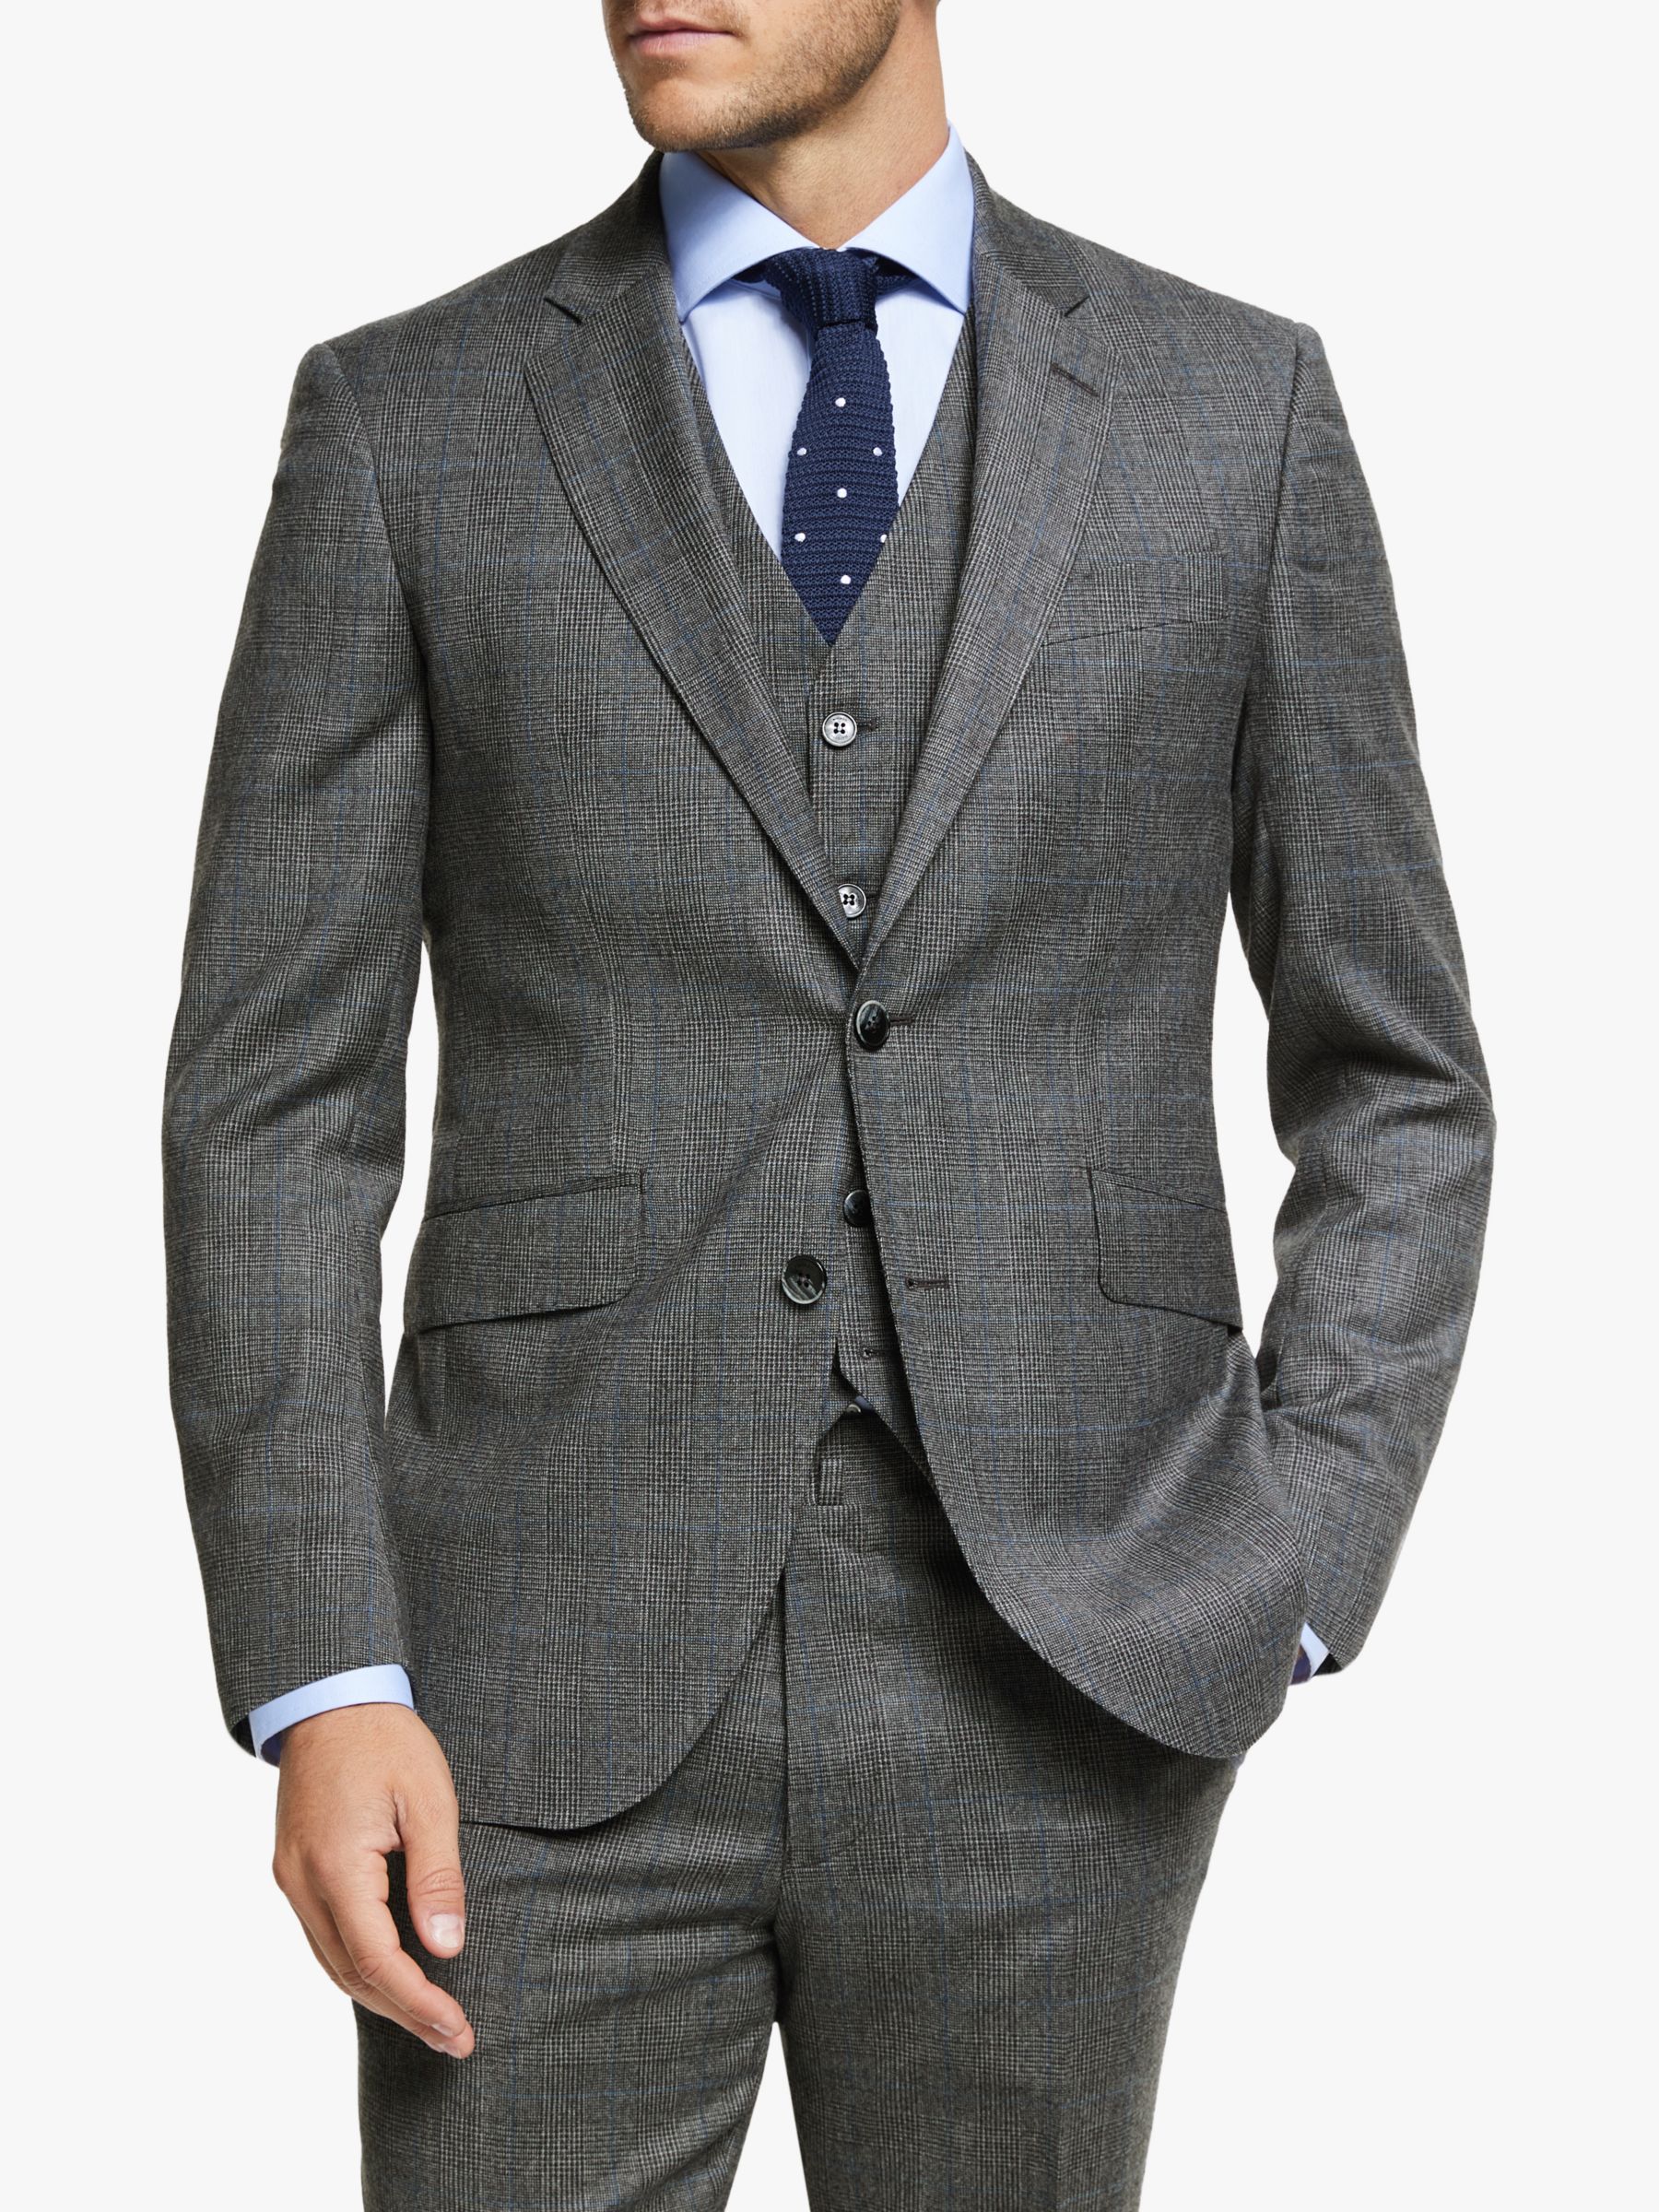 Hackett London Chelsea Prince of Wales Check Tailored Suit Jacket, Grey/Blue